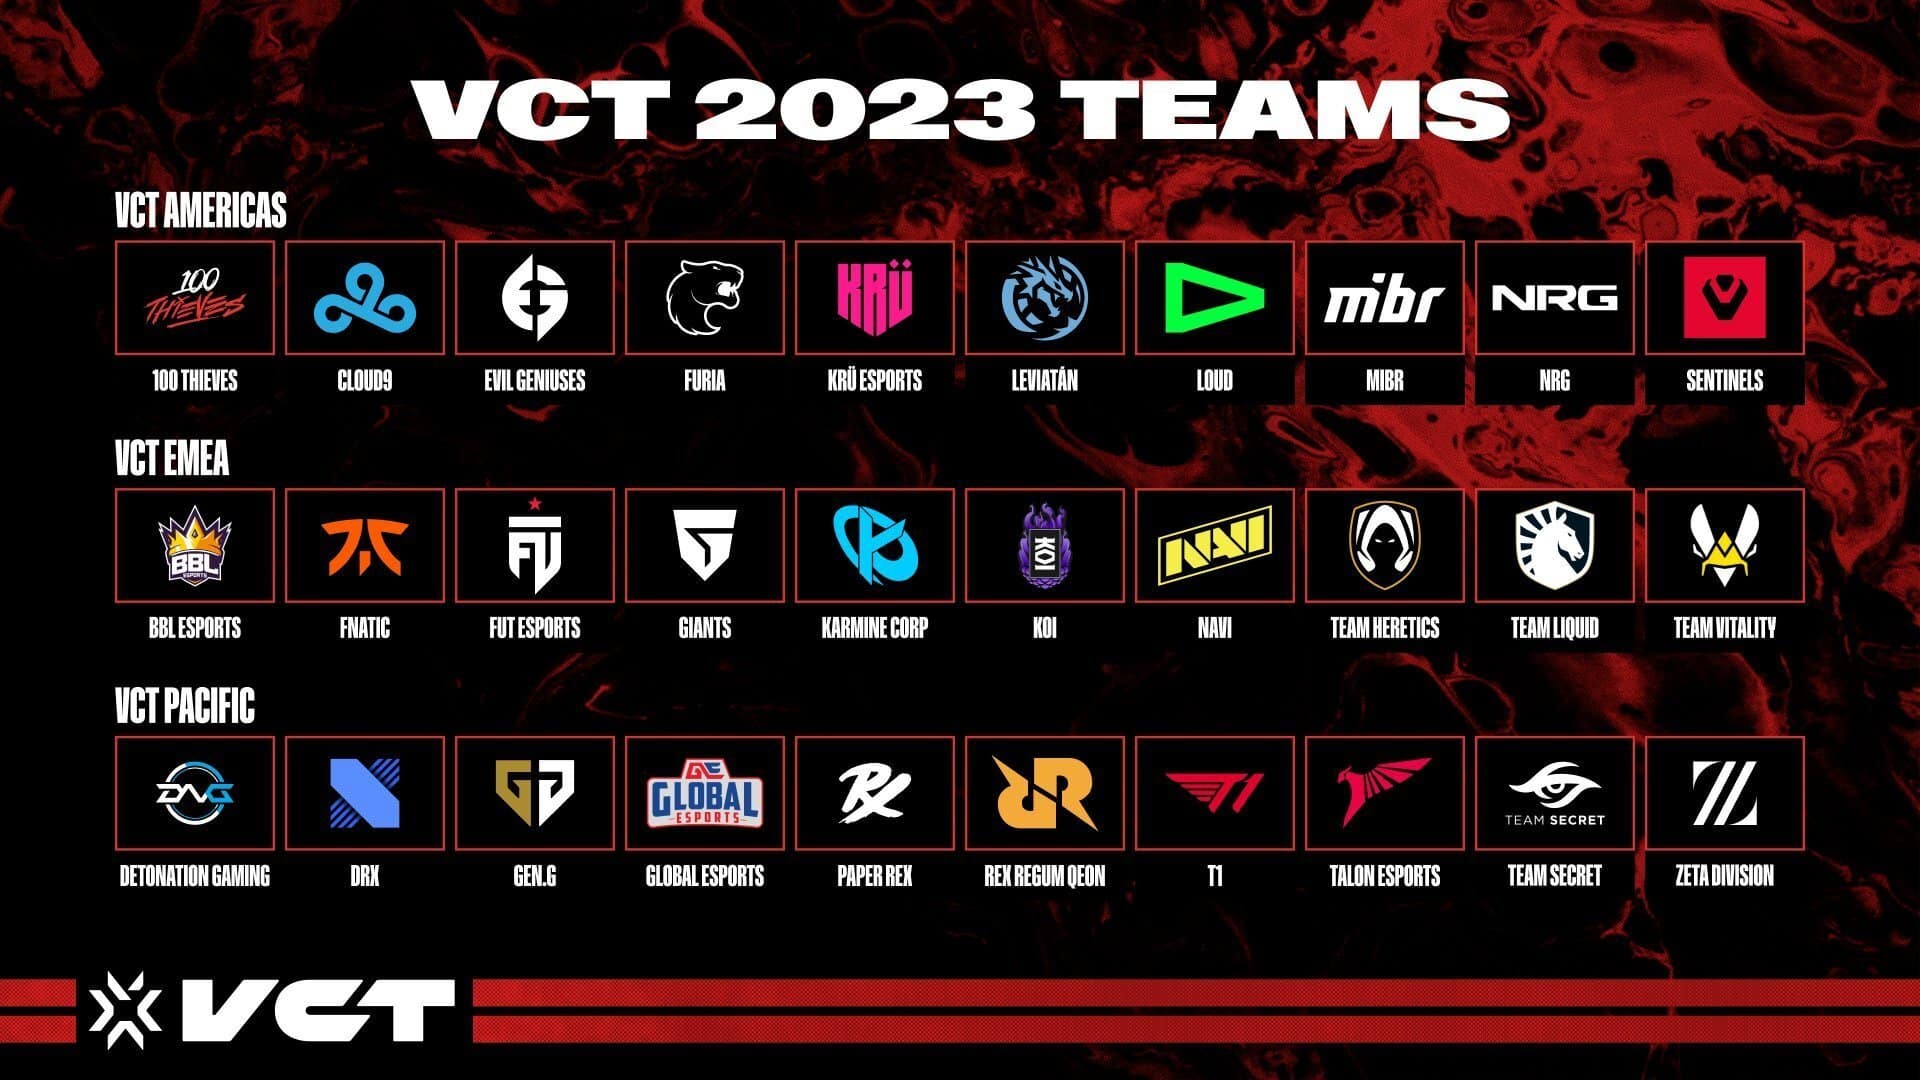 Riot Games has announced the first 30 partnered teams for VCT 2023.